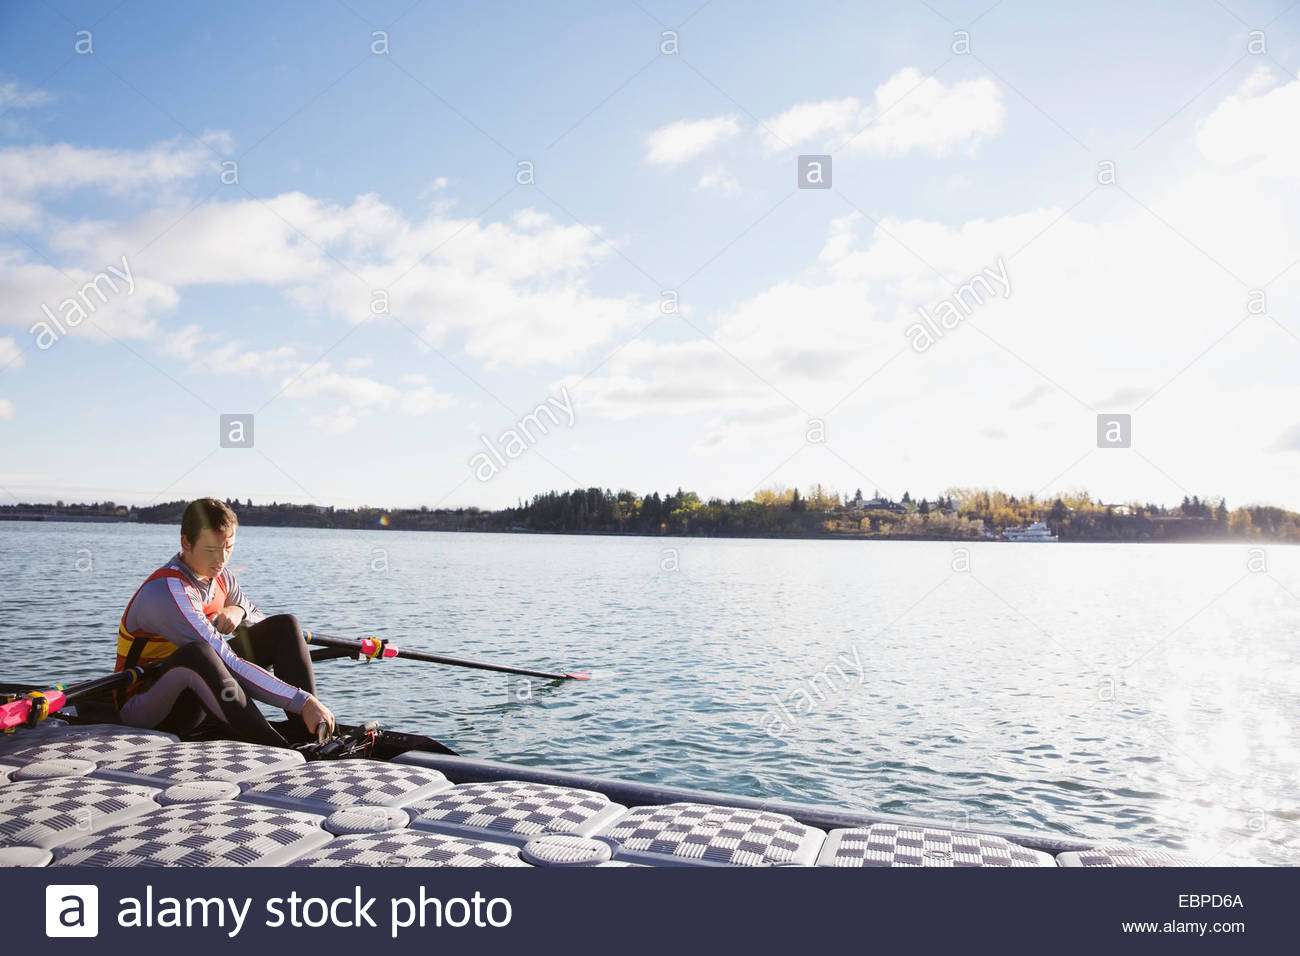 Rower in scull at waterfront Stock Photo